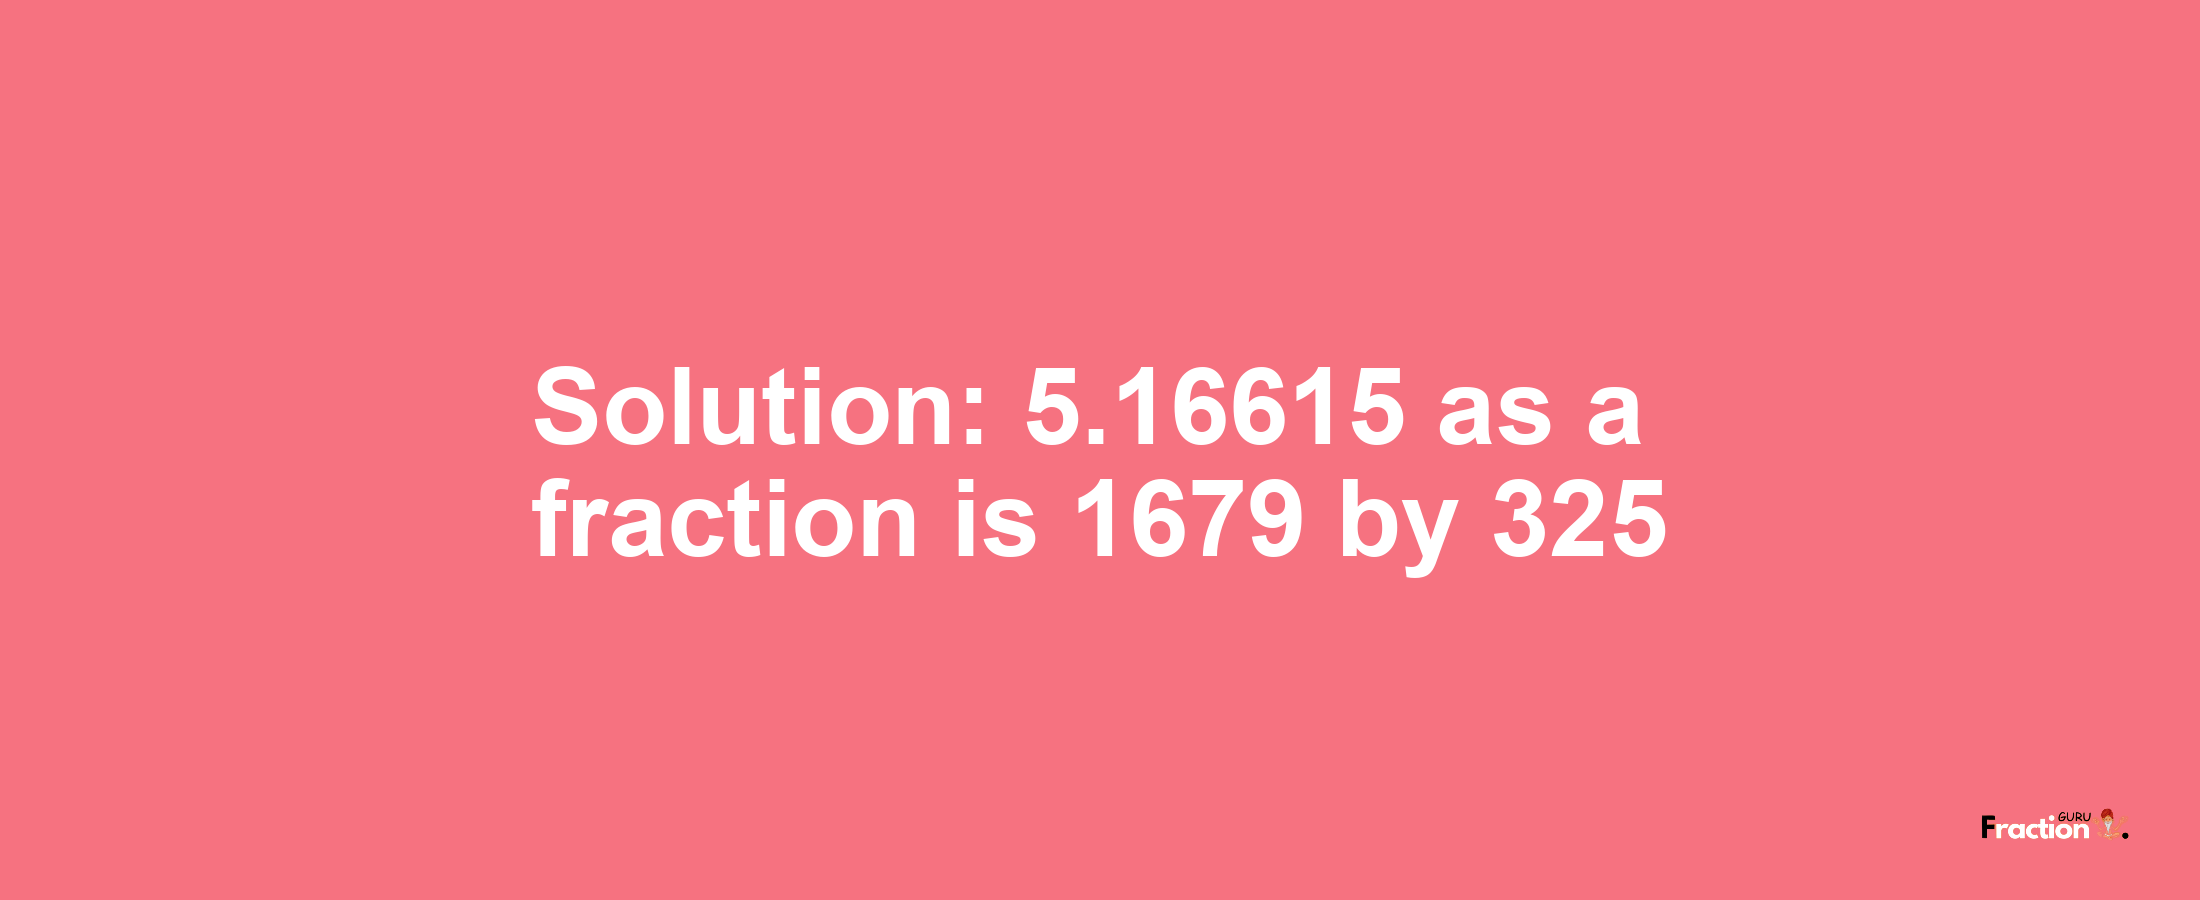 Solution:5.16615 as a fraction is 1679/325